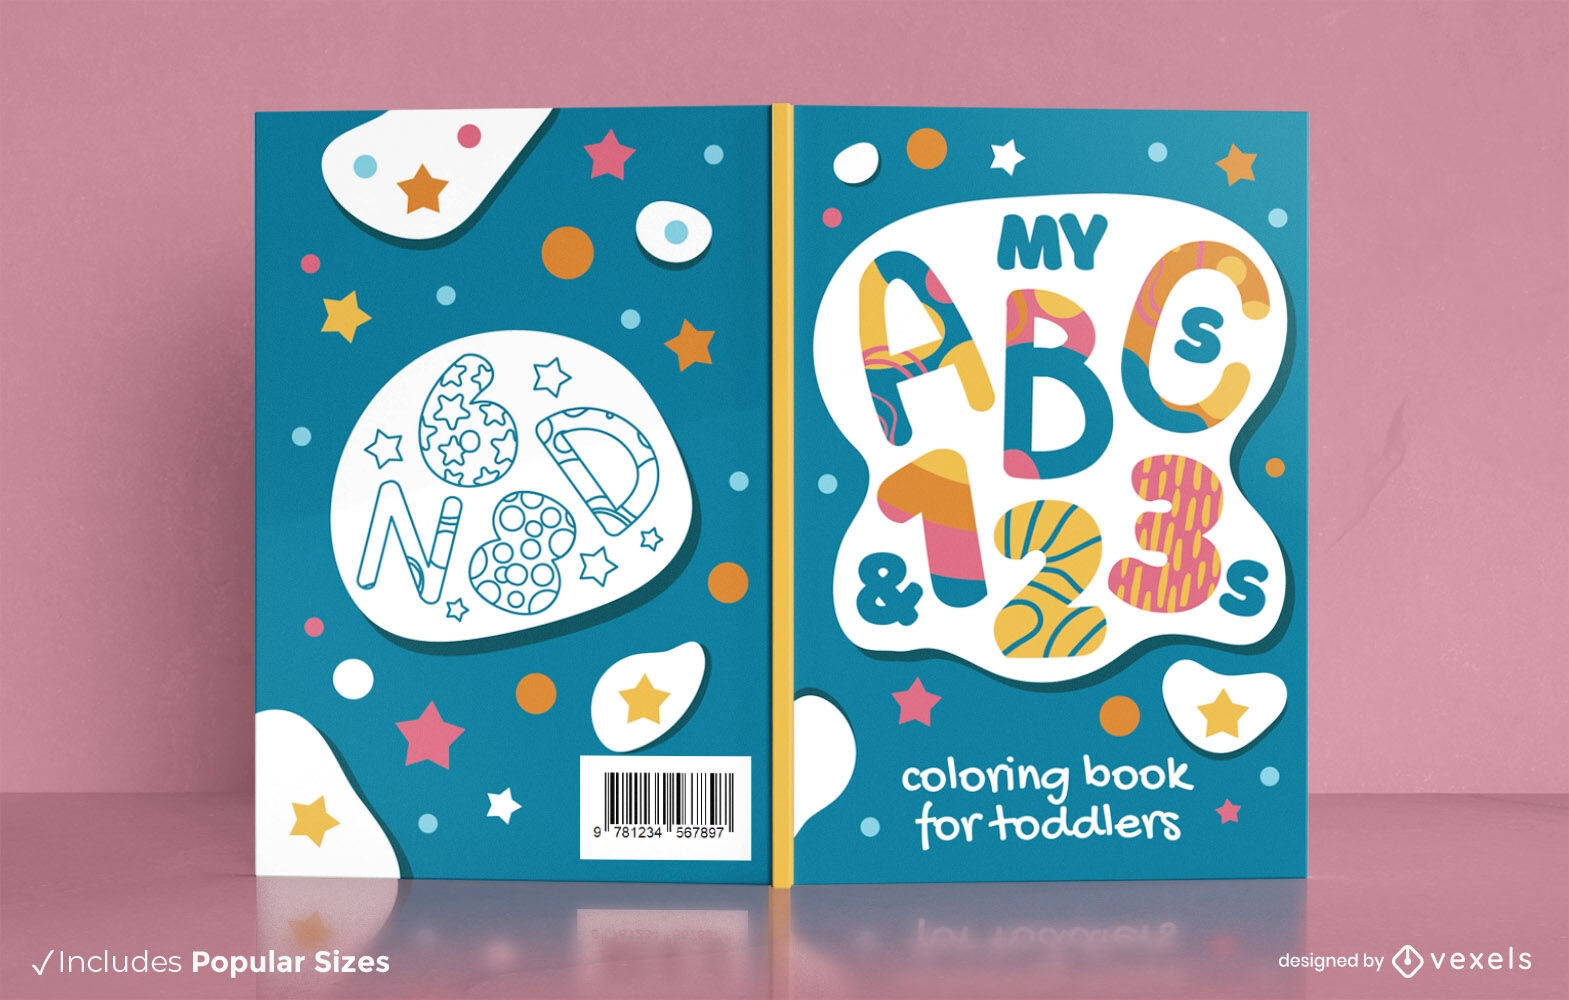 ABC childen's coloring book cover design KDP